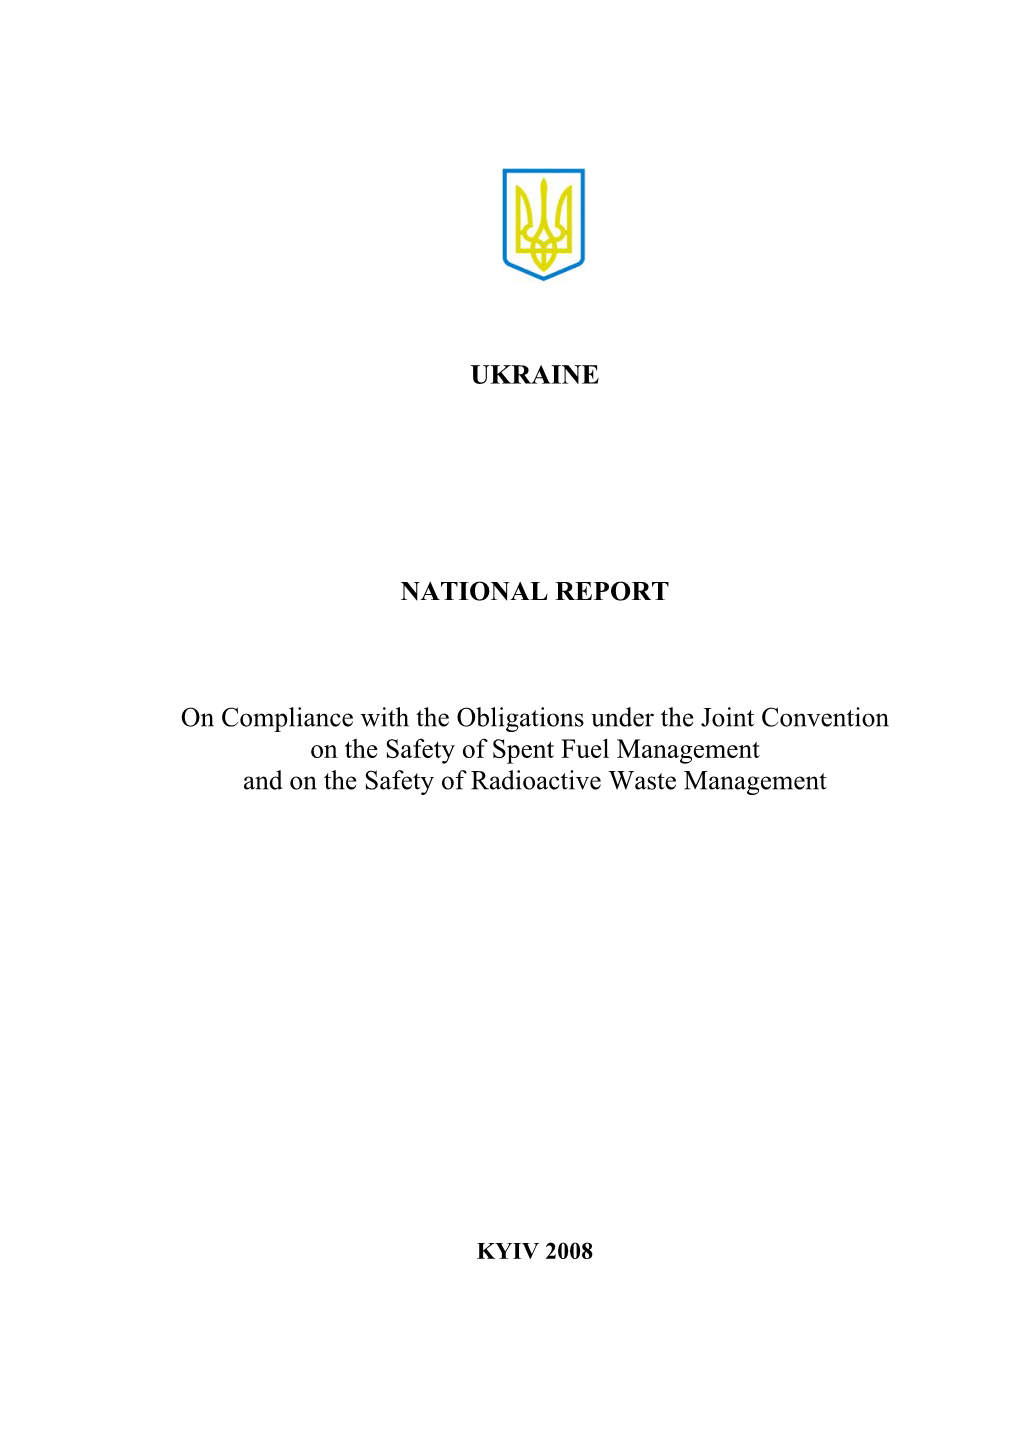 National Report. Document Developed in Compliance with The